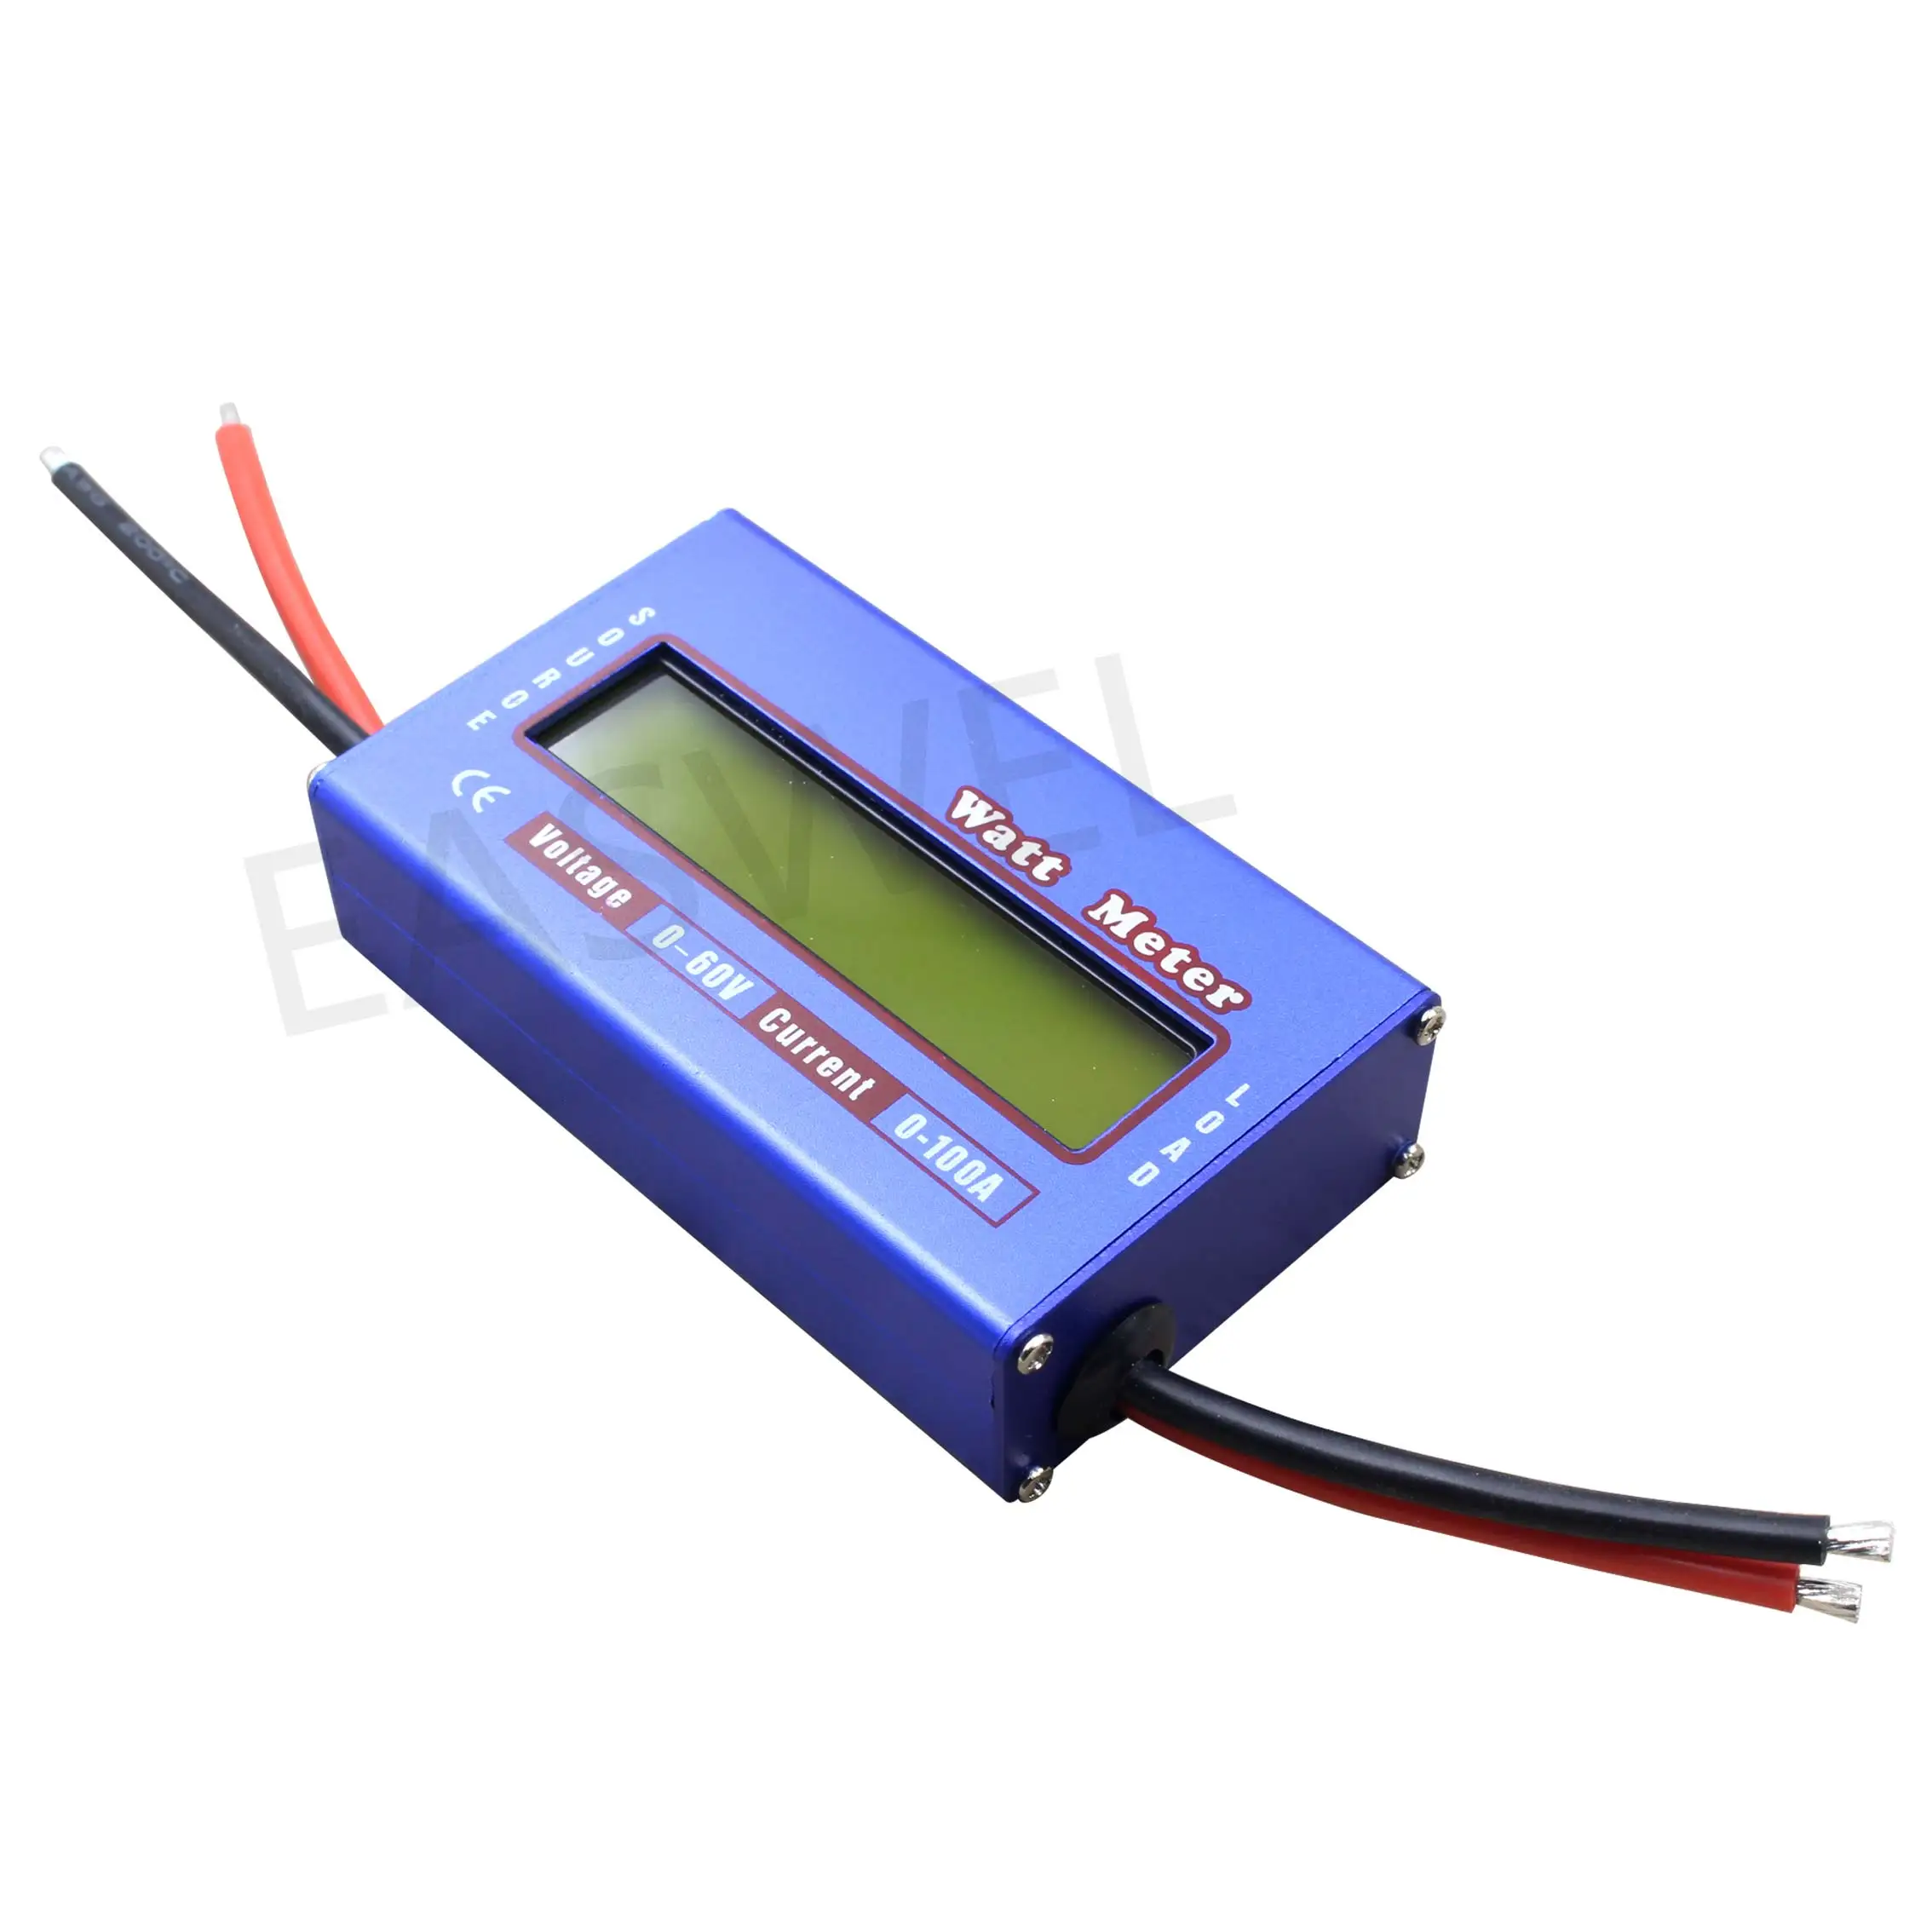 amp power analyzer for wind or solar systems volts High Precision watt 